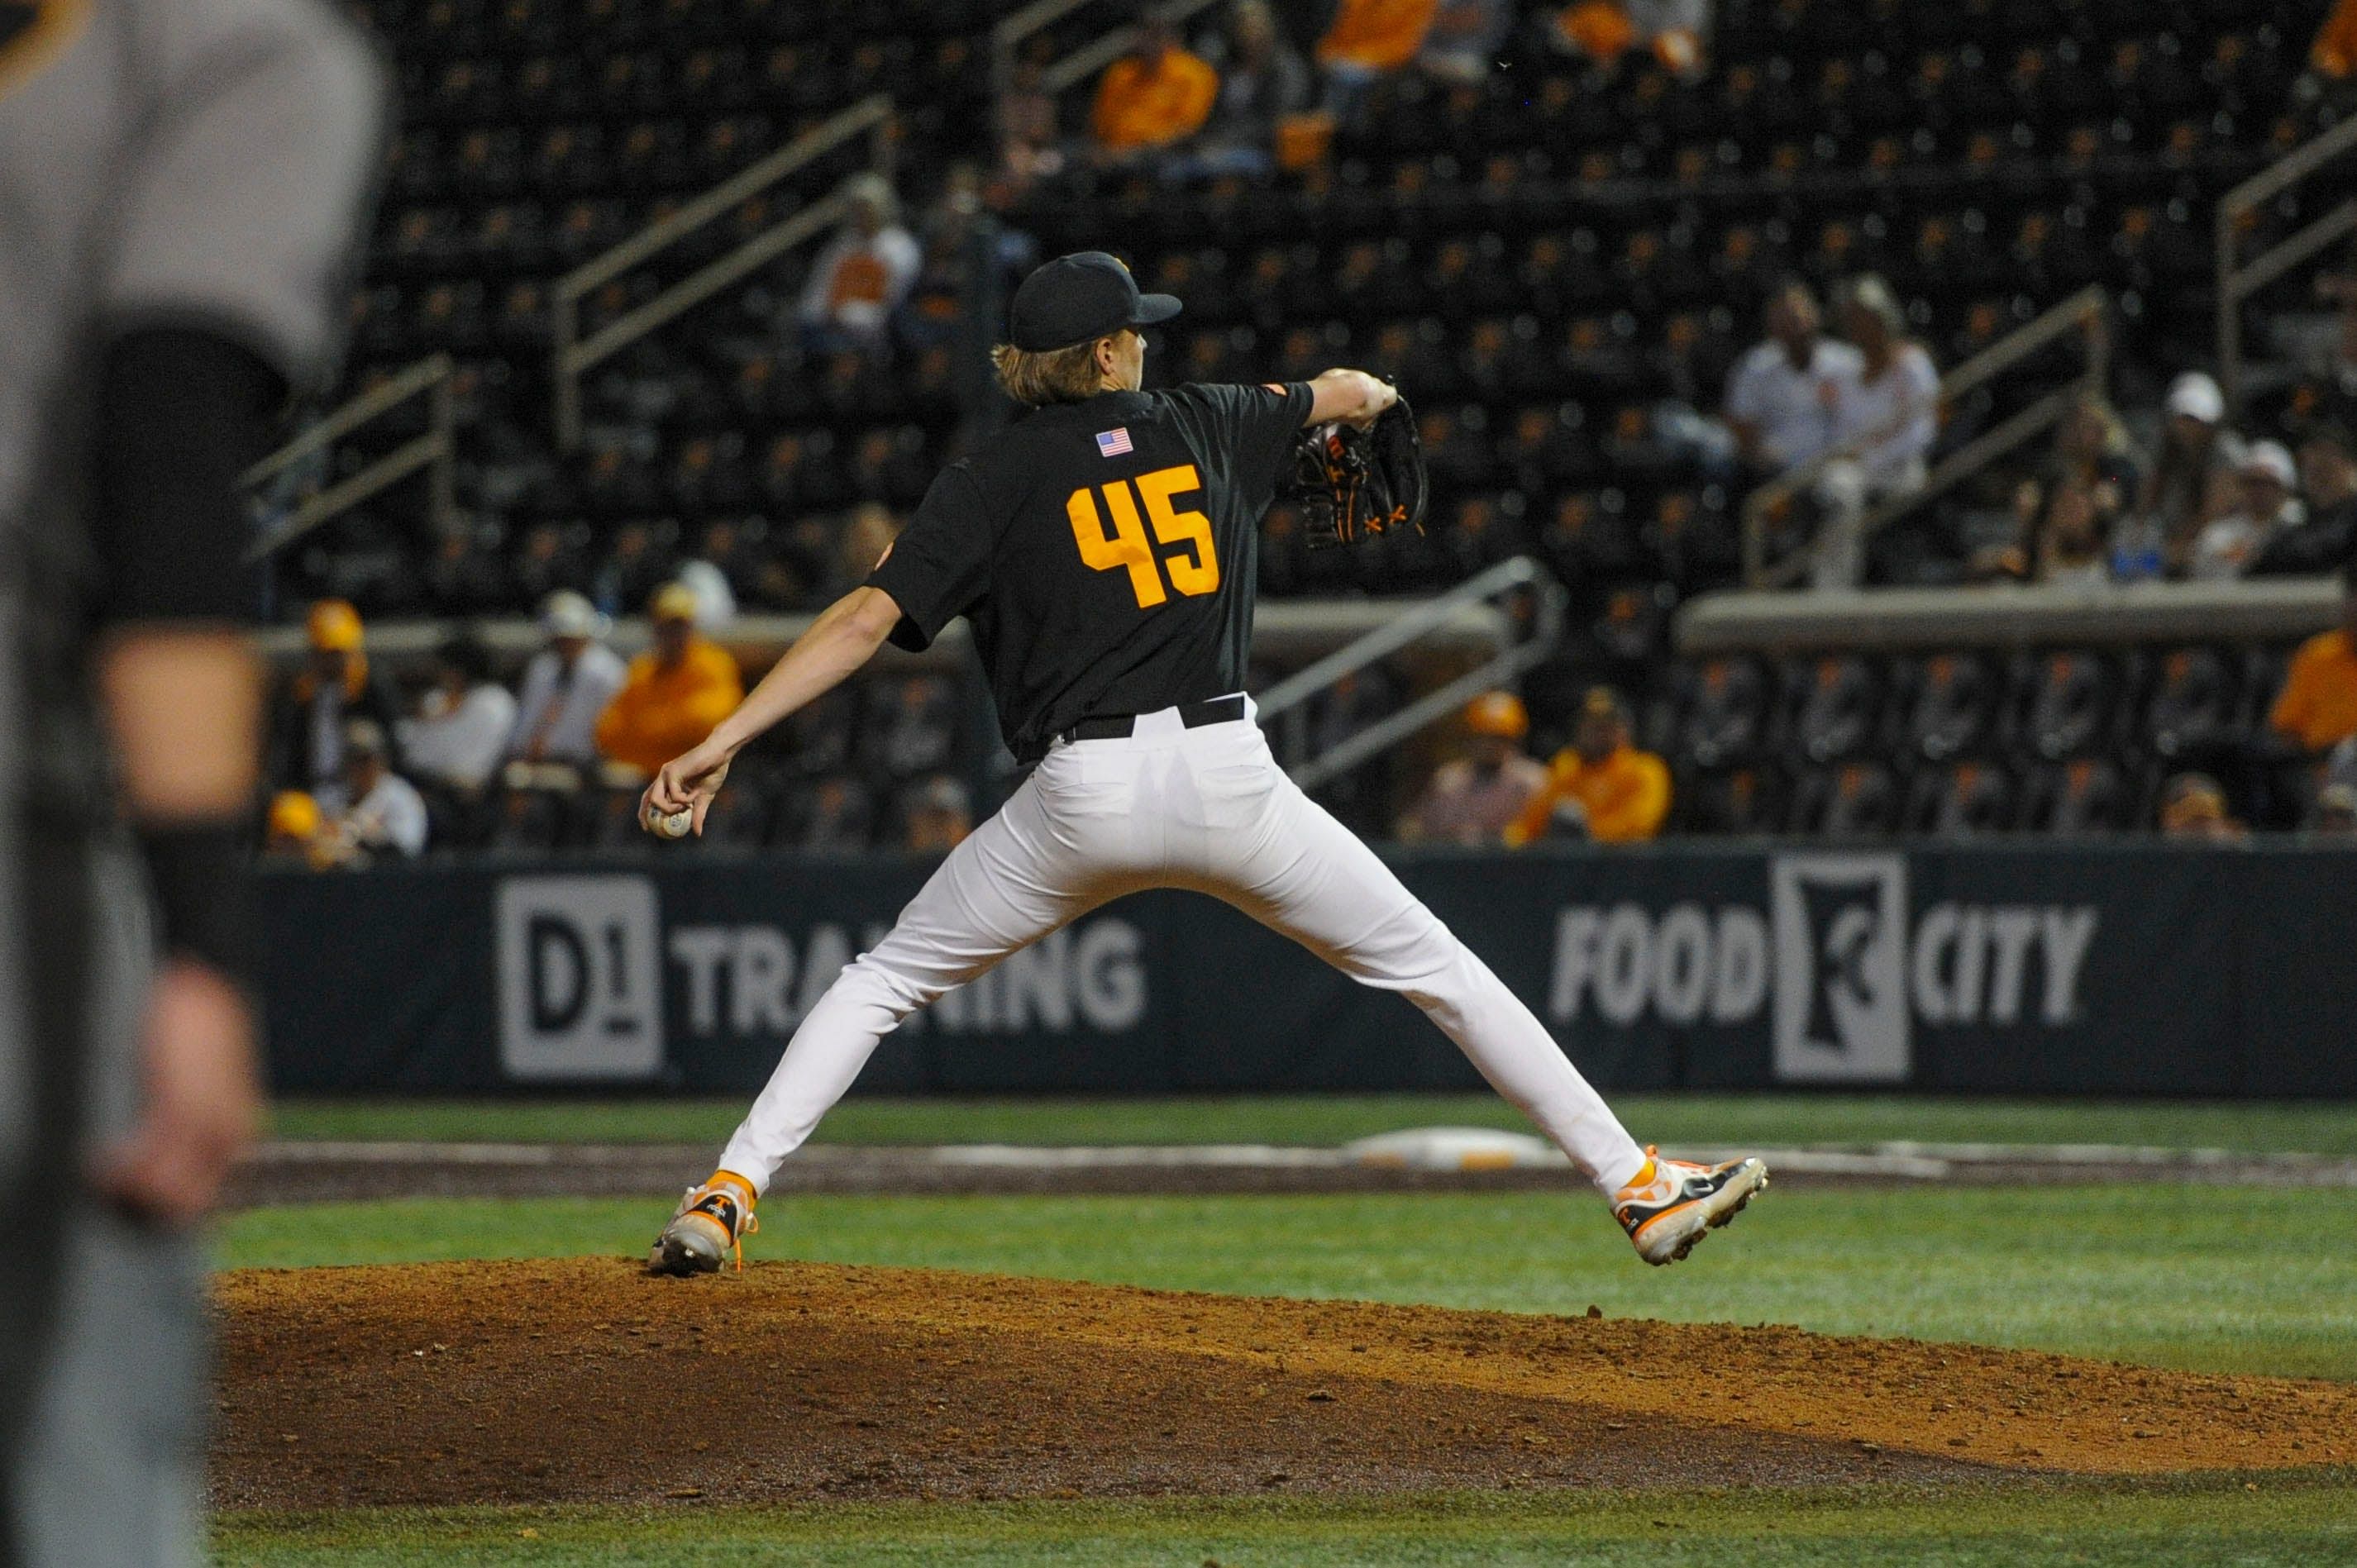 After a promising freshman season, pitcher Matthew Dallas is moving on from Tennessee in the transfer portal. (Photo Credit: Knoxville News-Sentinel)